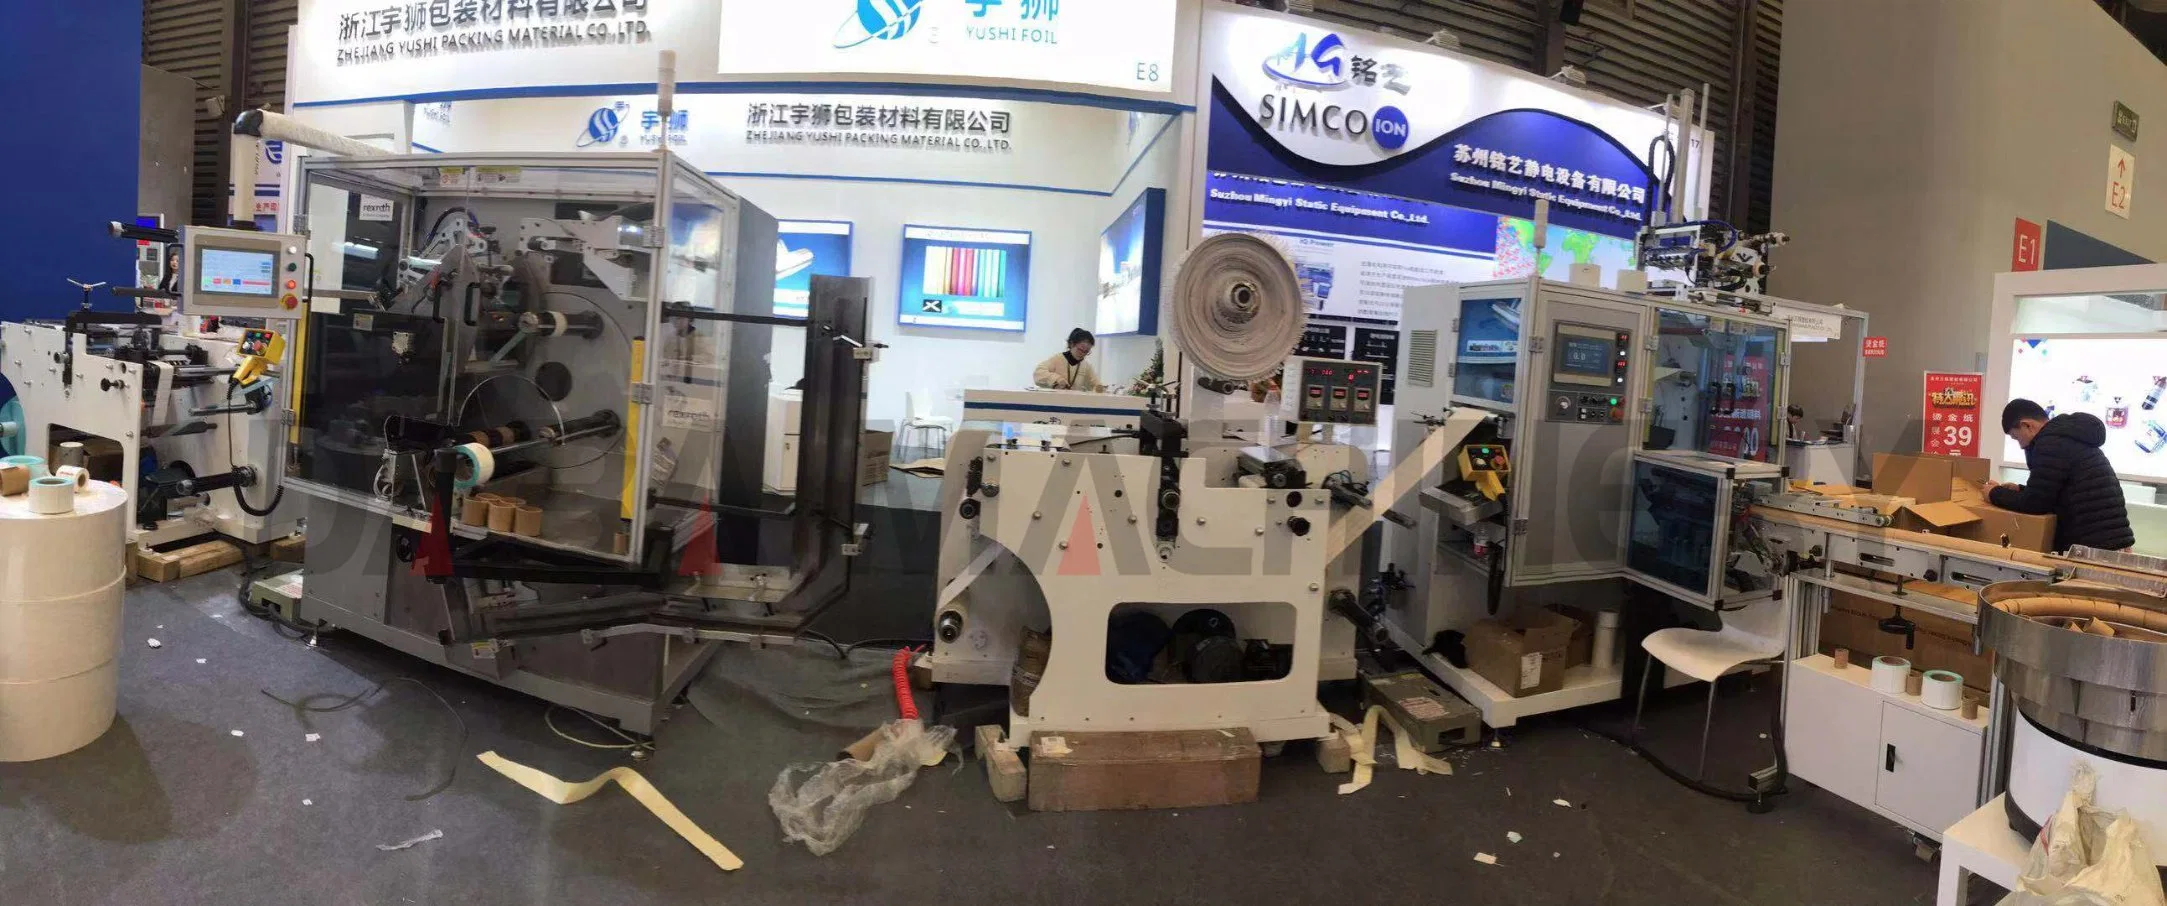 Dbdg-330b Automatic Turret Rewinding Machine with Four Spindles and Glueless Paper Core